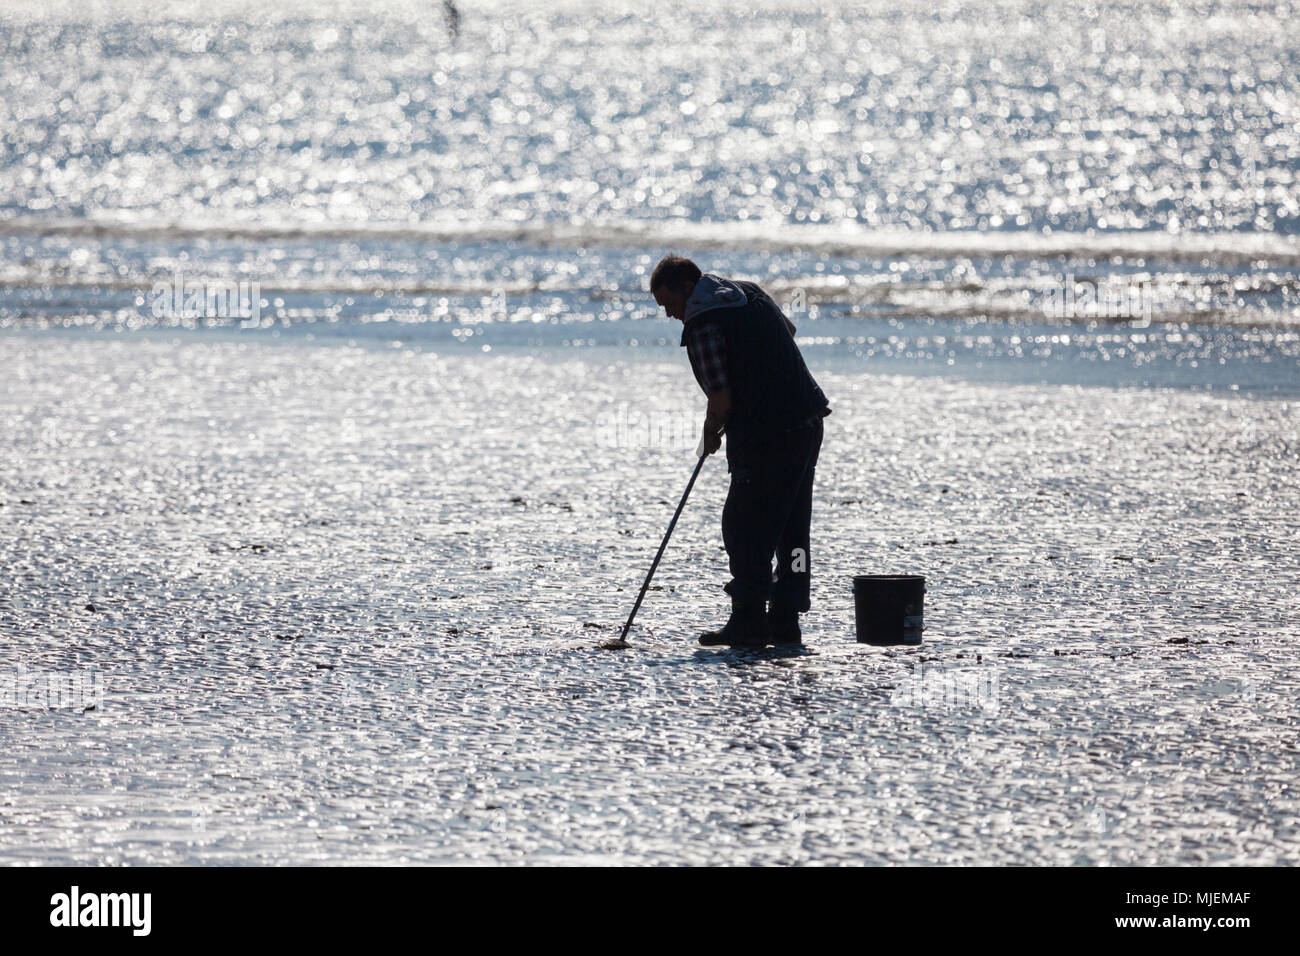 Hastings, East Sussex, UK. 5th May, 2018. UK Weather: Warm start to the morning in Hastings, East Sussex with temperatures in some parts of the country exceeding 20°C. A local fisherman looks for lugworms or sandworms. © Paul Lawrenson 2018, Photo Credit: Paul Lawrenson / Alamy Live News Stock Photo